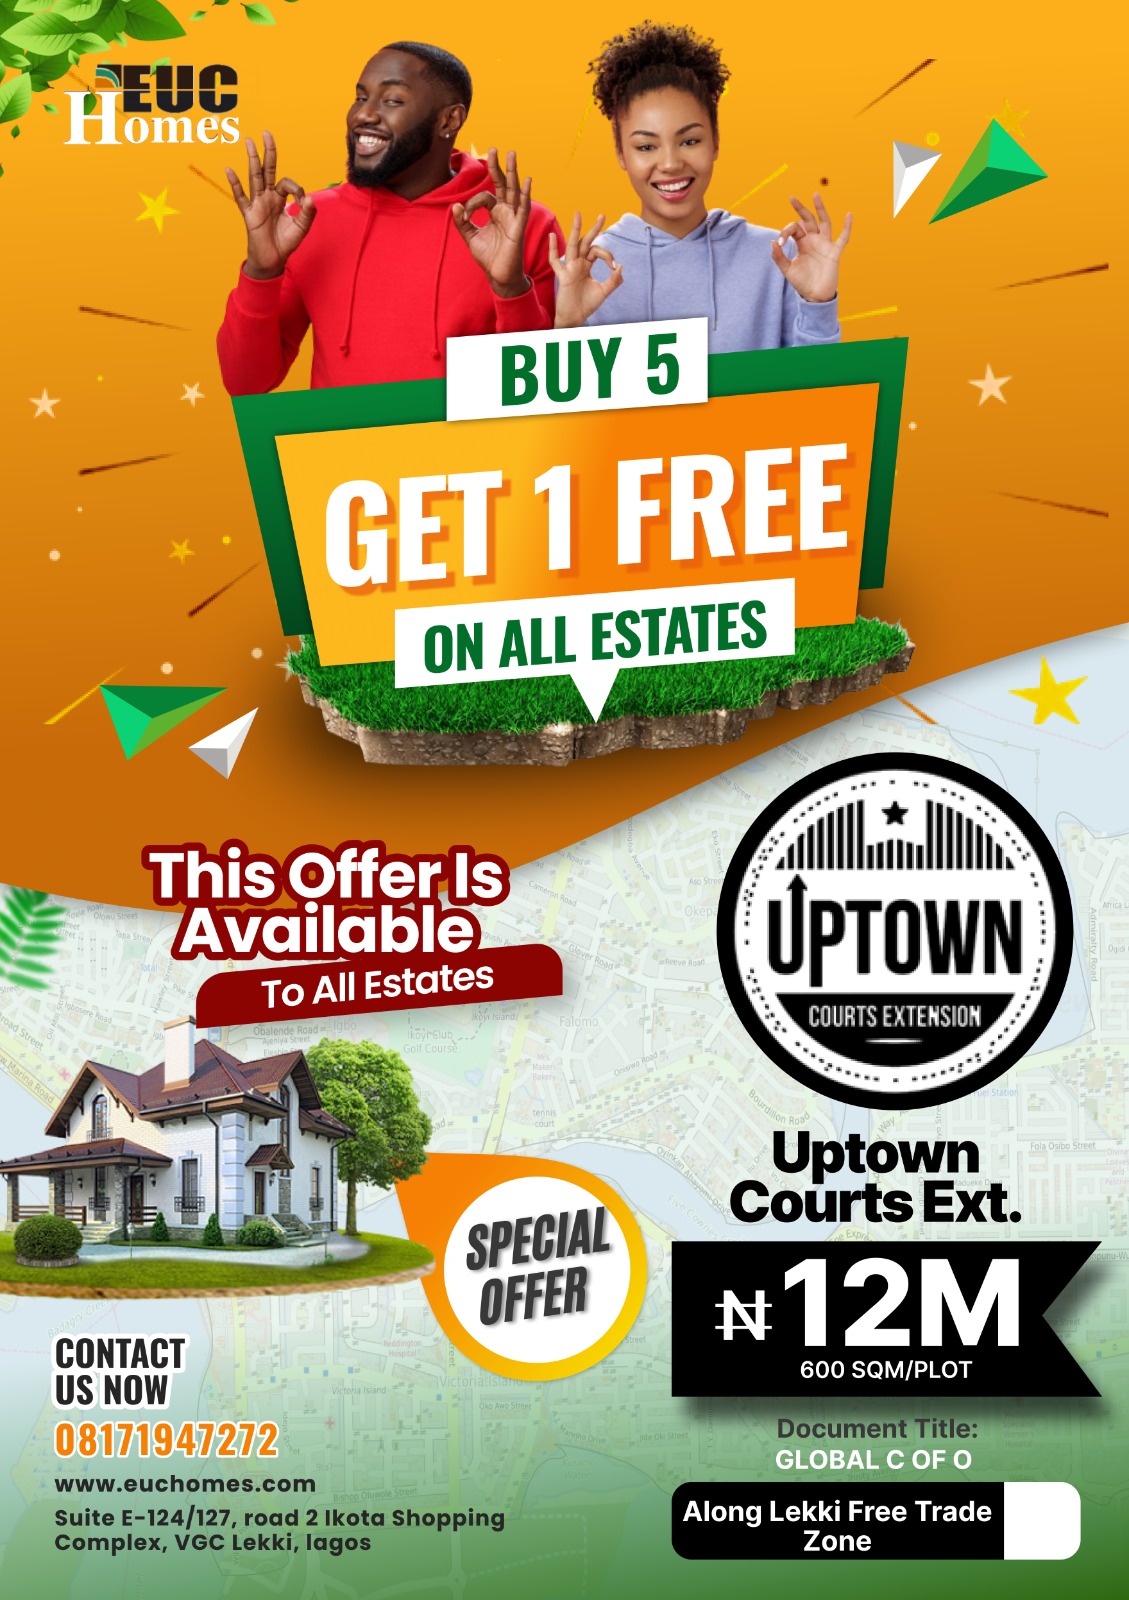 Estate: Buy Properties And Gets I Free – As EUC Homes Release Uptown Courts Ext Offer